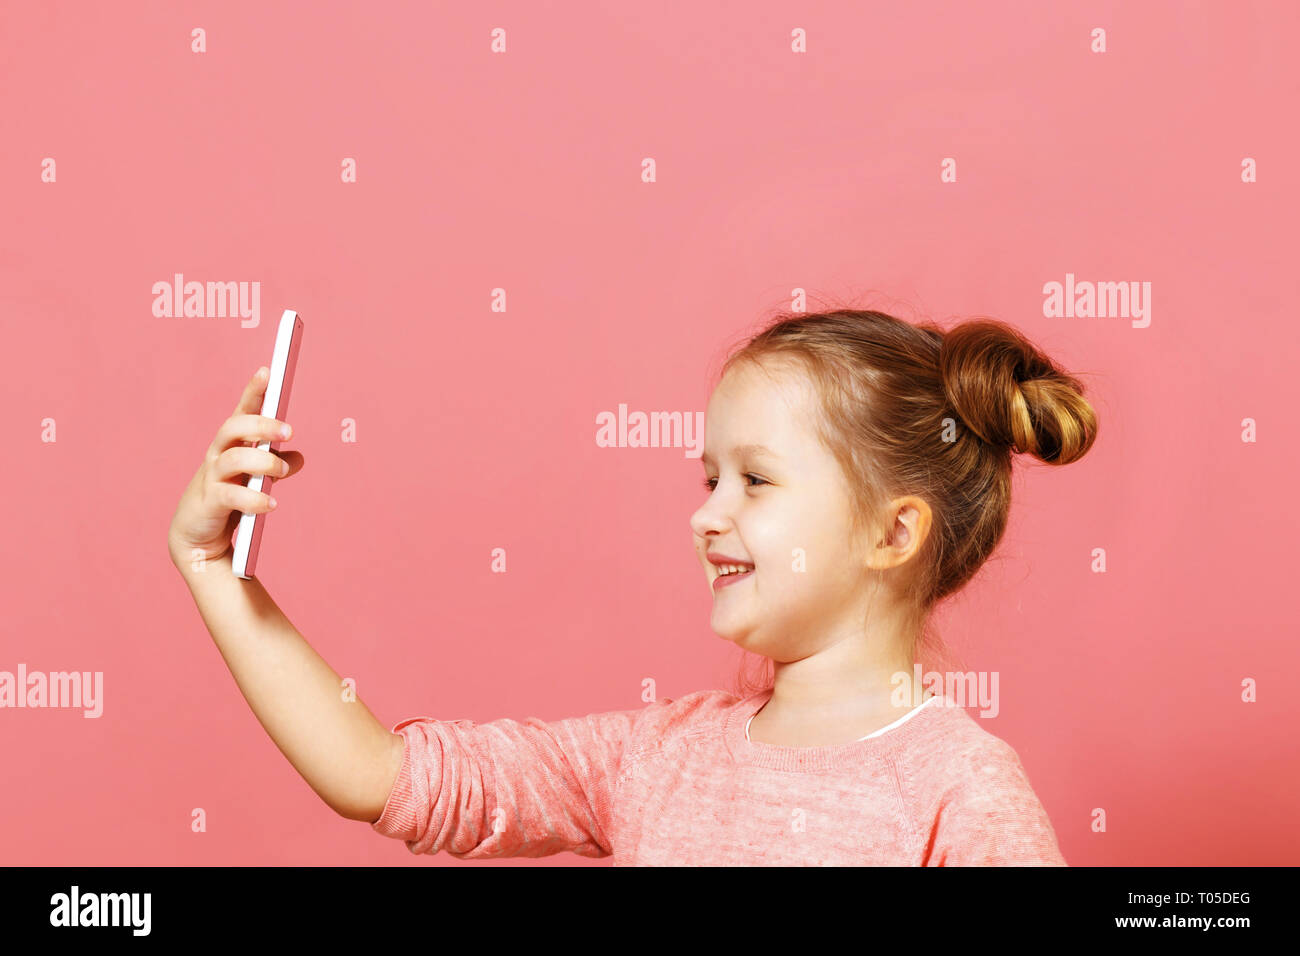 Closeup portrait of a cute little girl with buns of hair on a pink background. The child holds the phone and takes a selfie Stock Photo